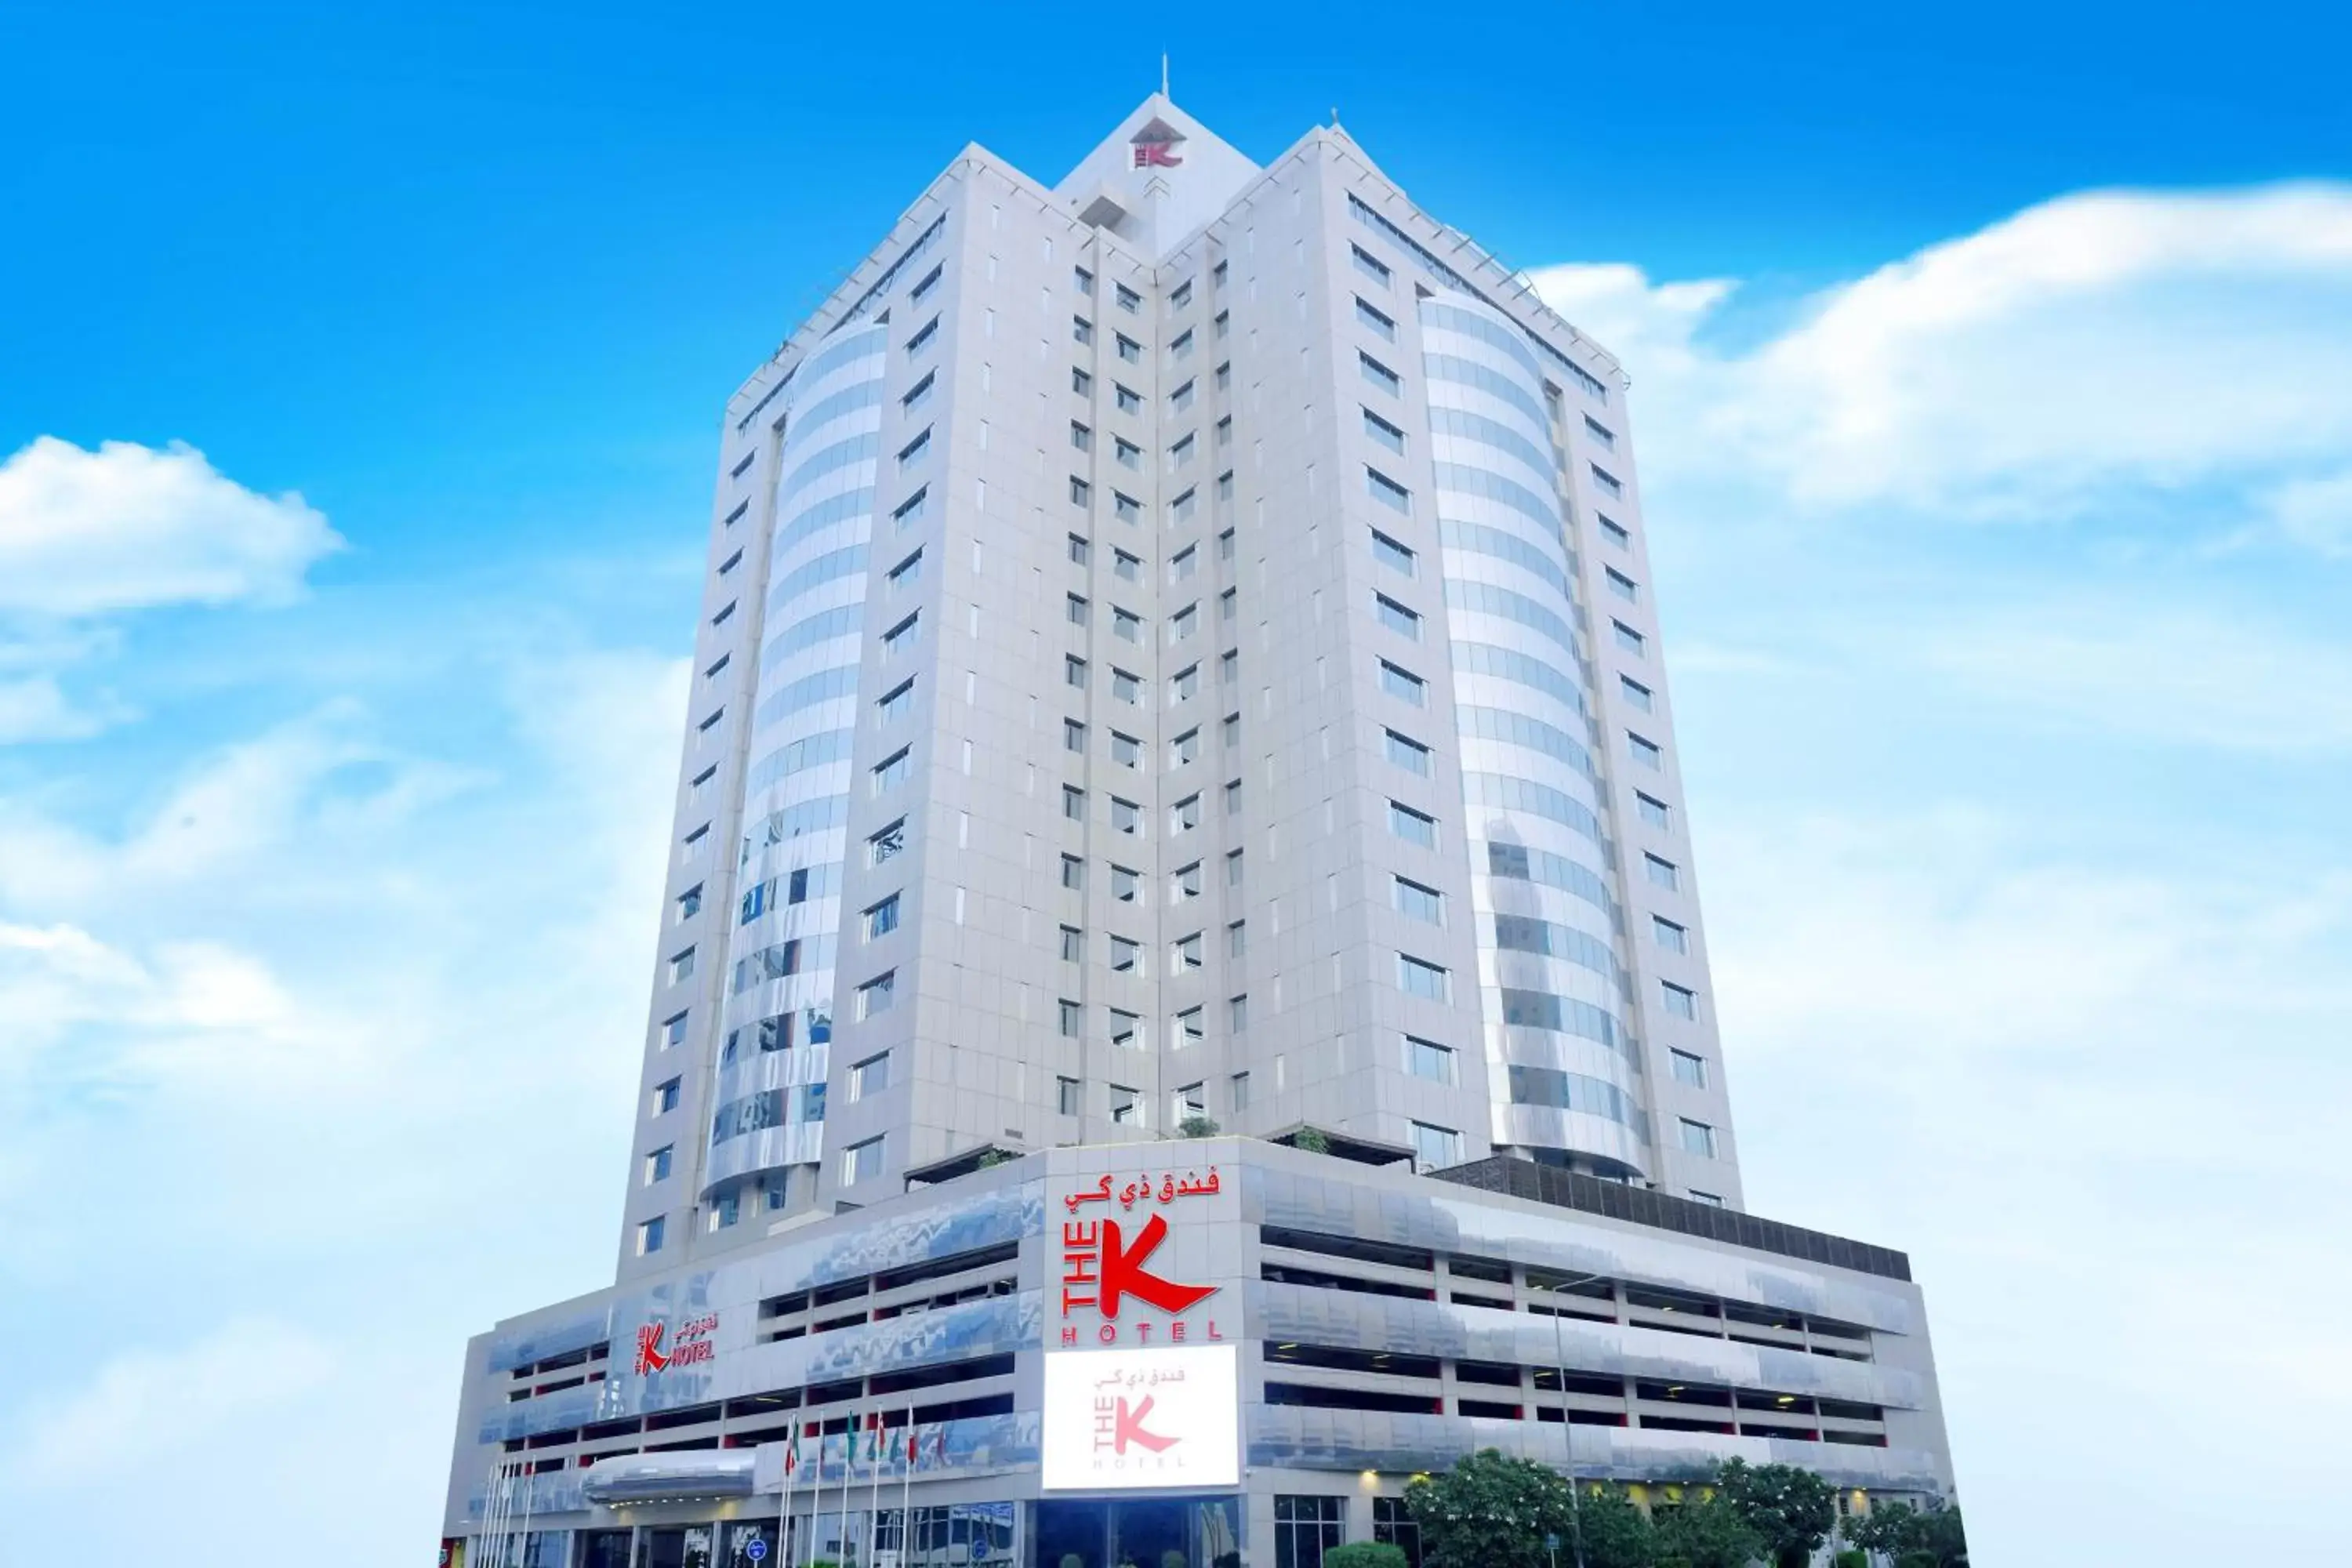 Property Building in The K Hotel